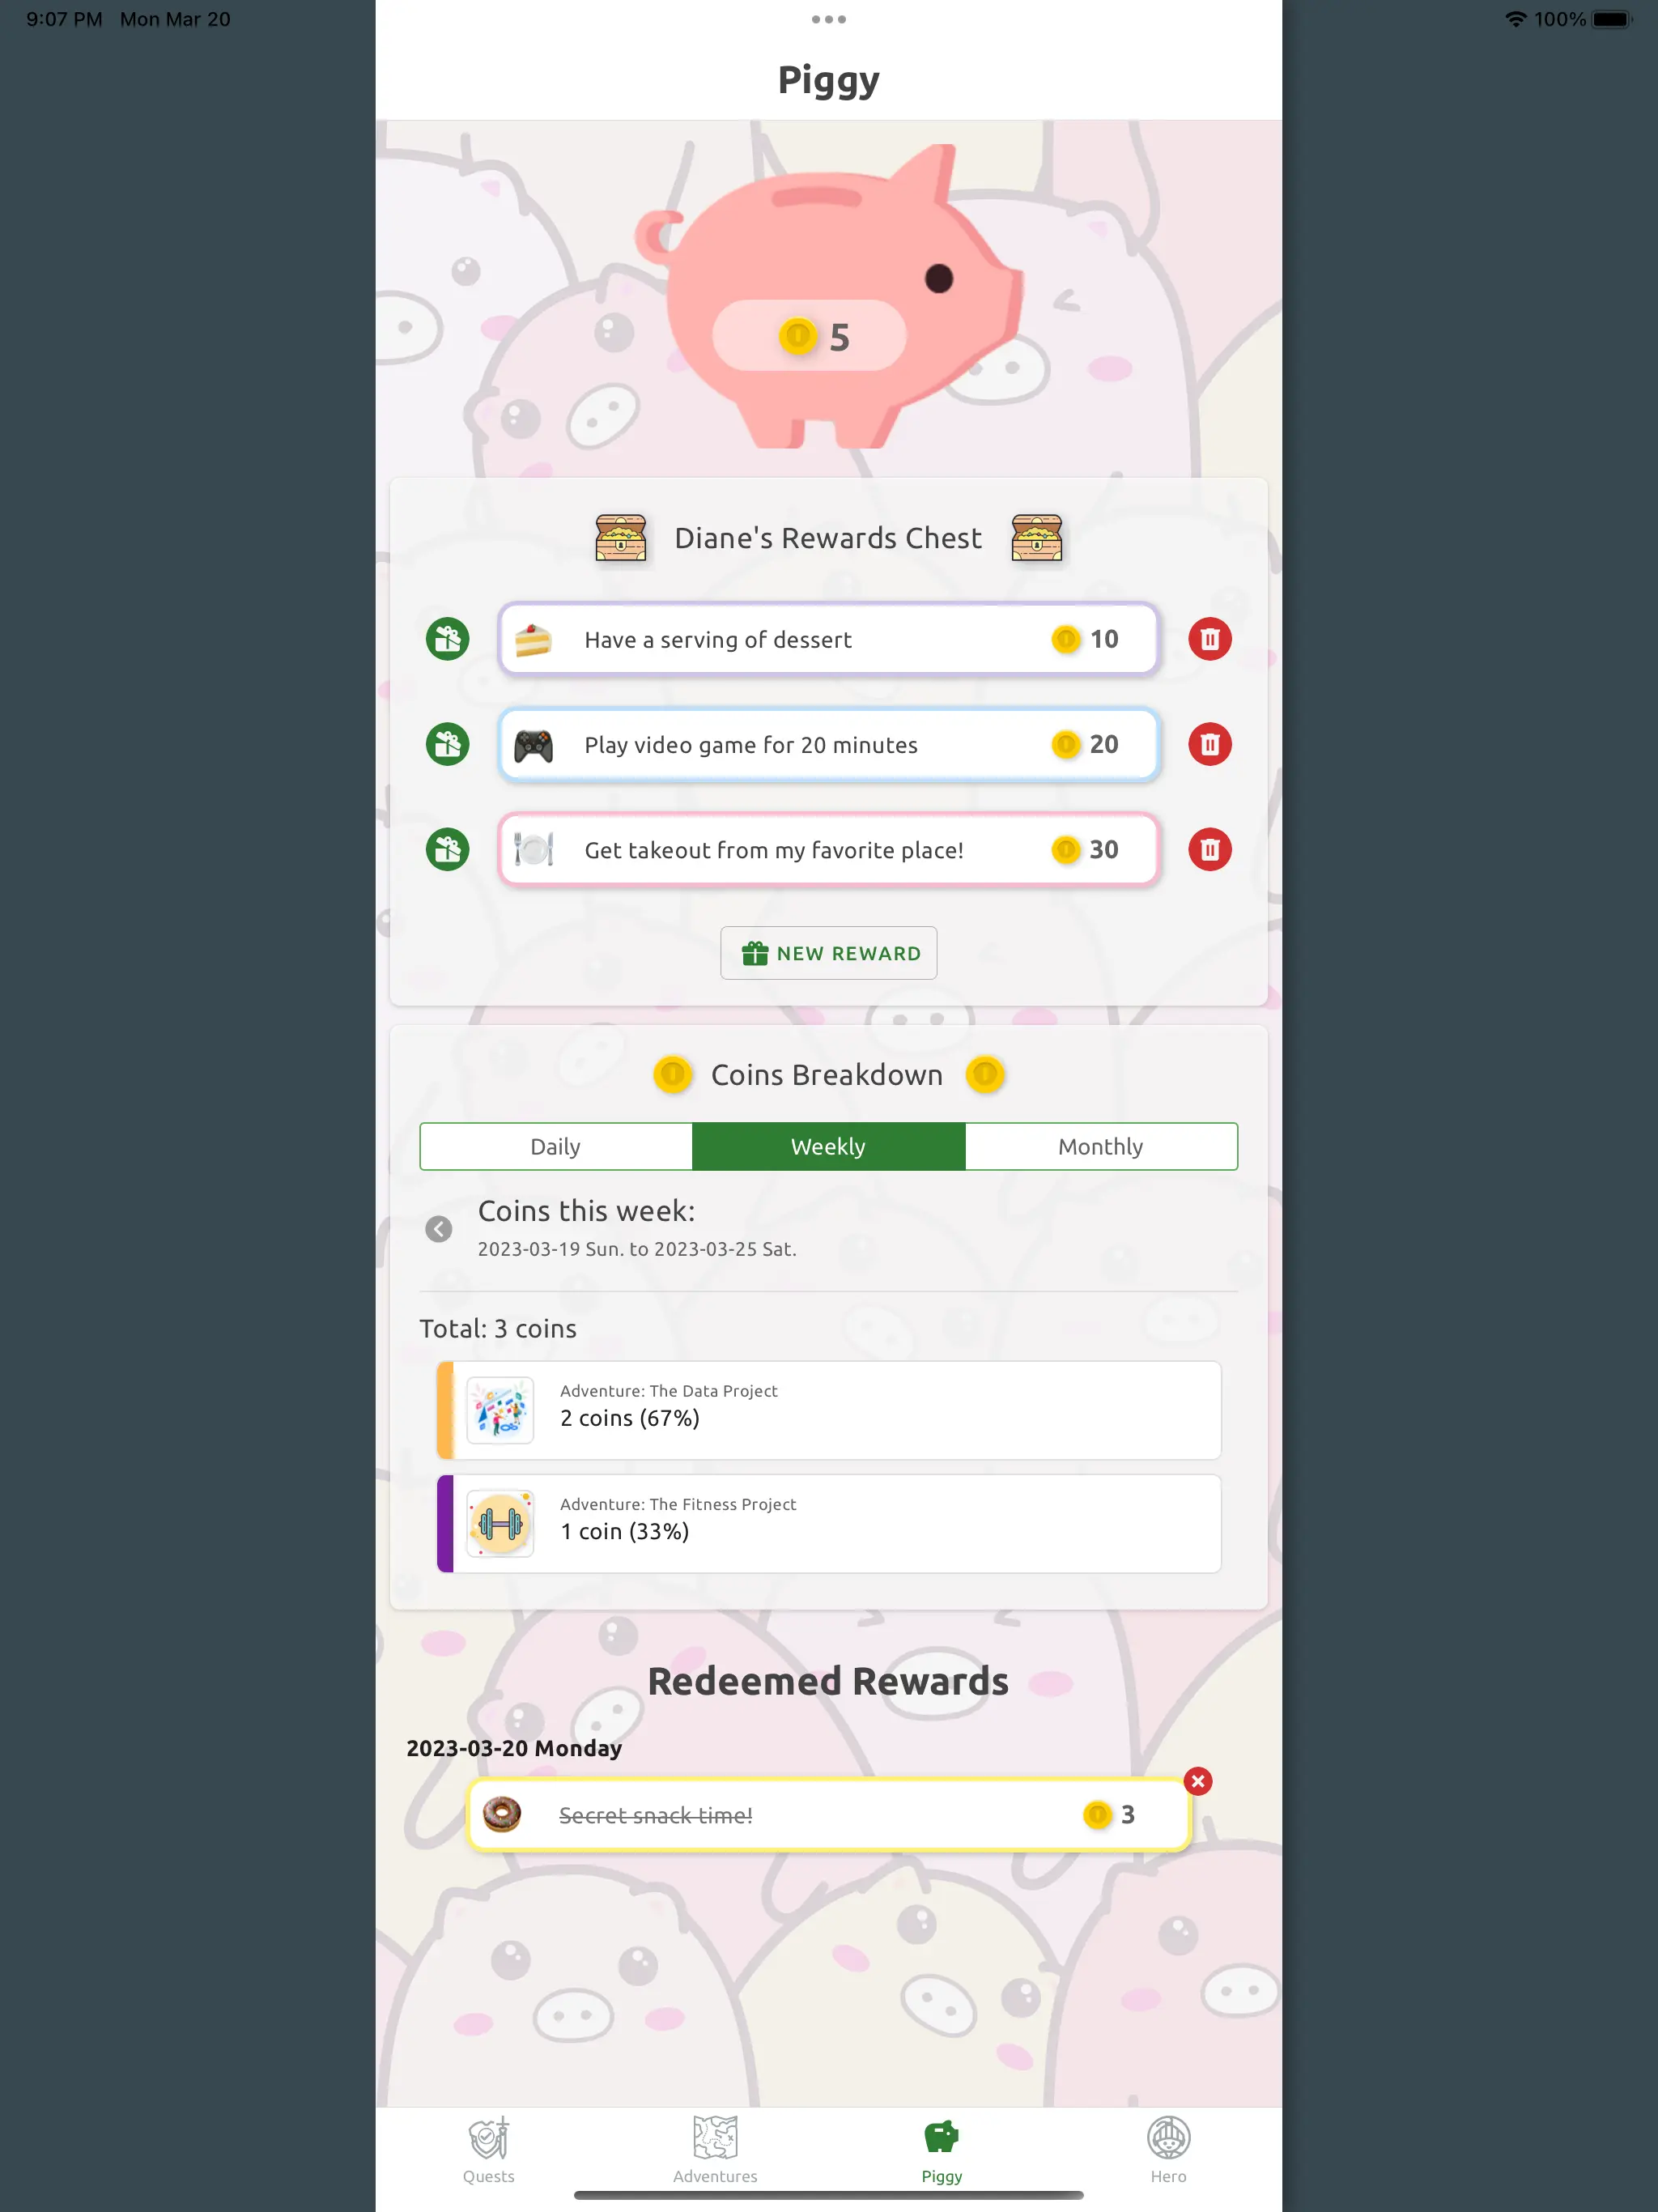 The newly released Piggy Reward System